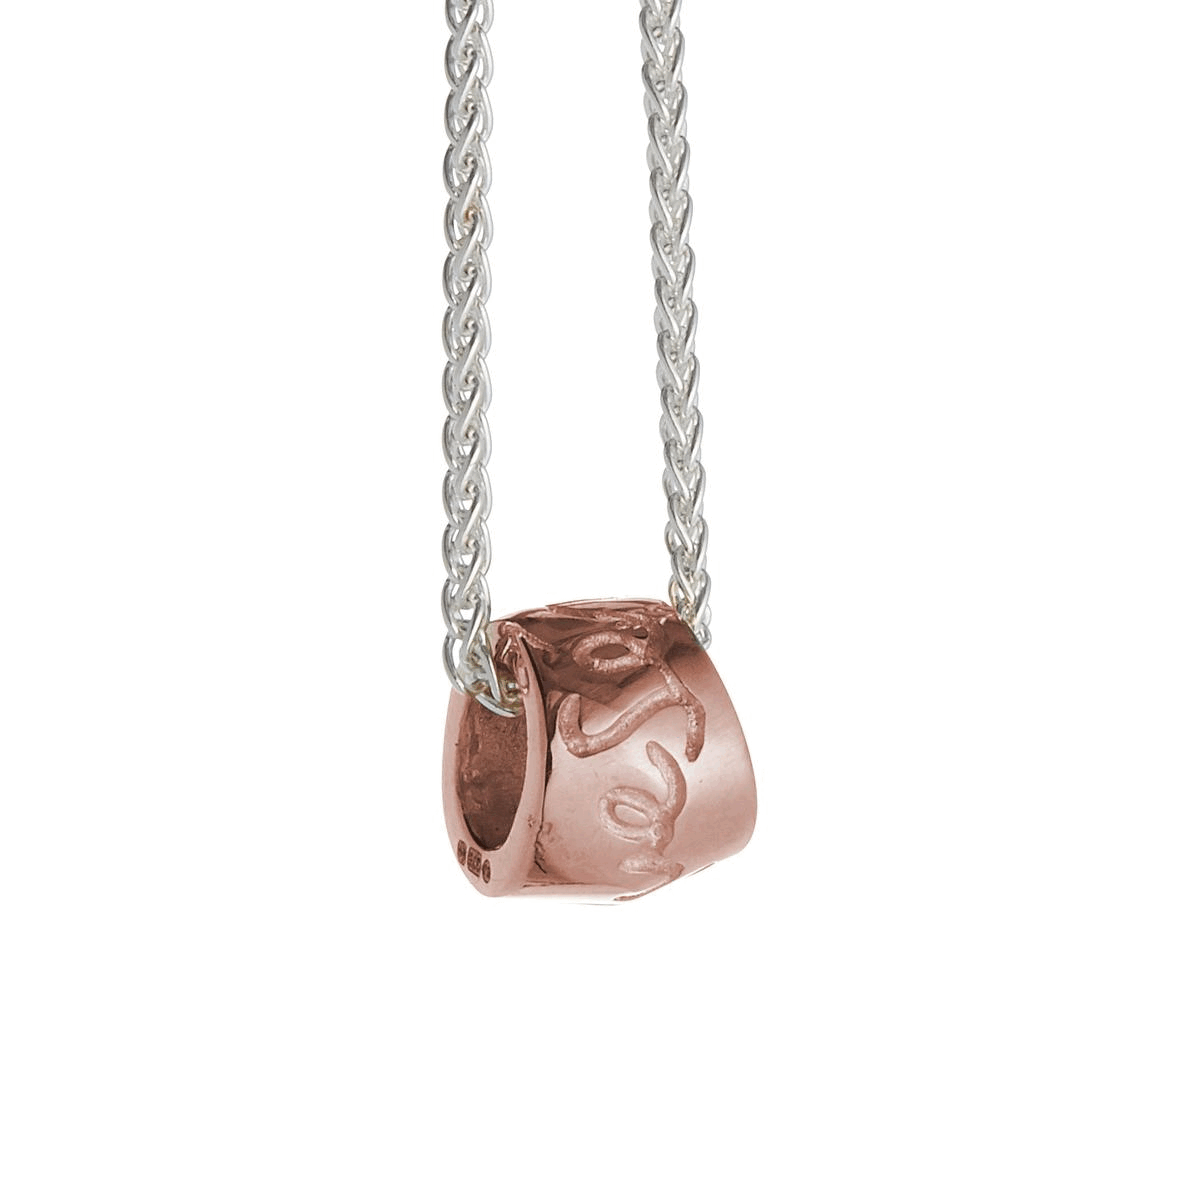 Que Sera recycled Rose Gold Worry Bead Necklace Mindful Slow Fashion Design Scarlett Jewellery UK